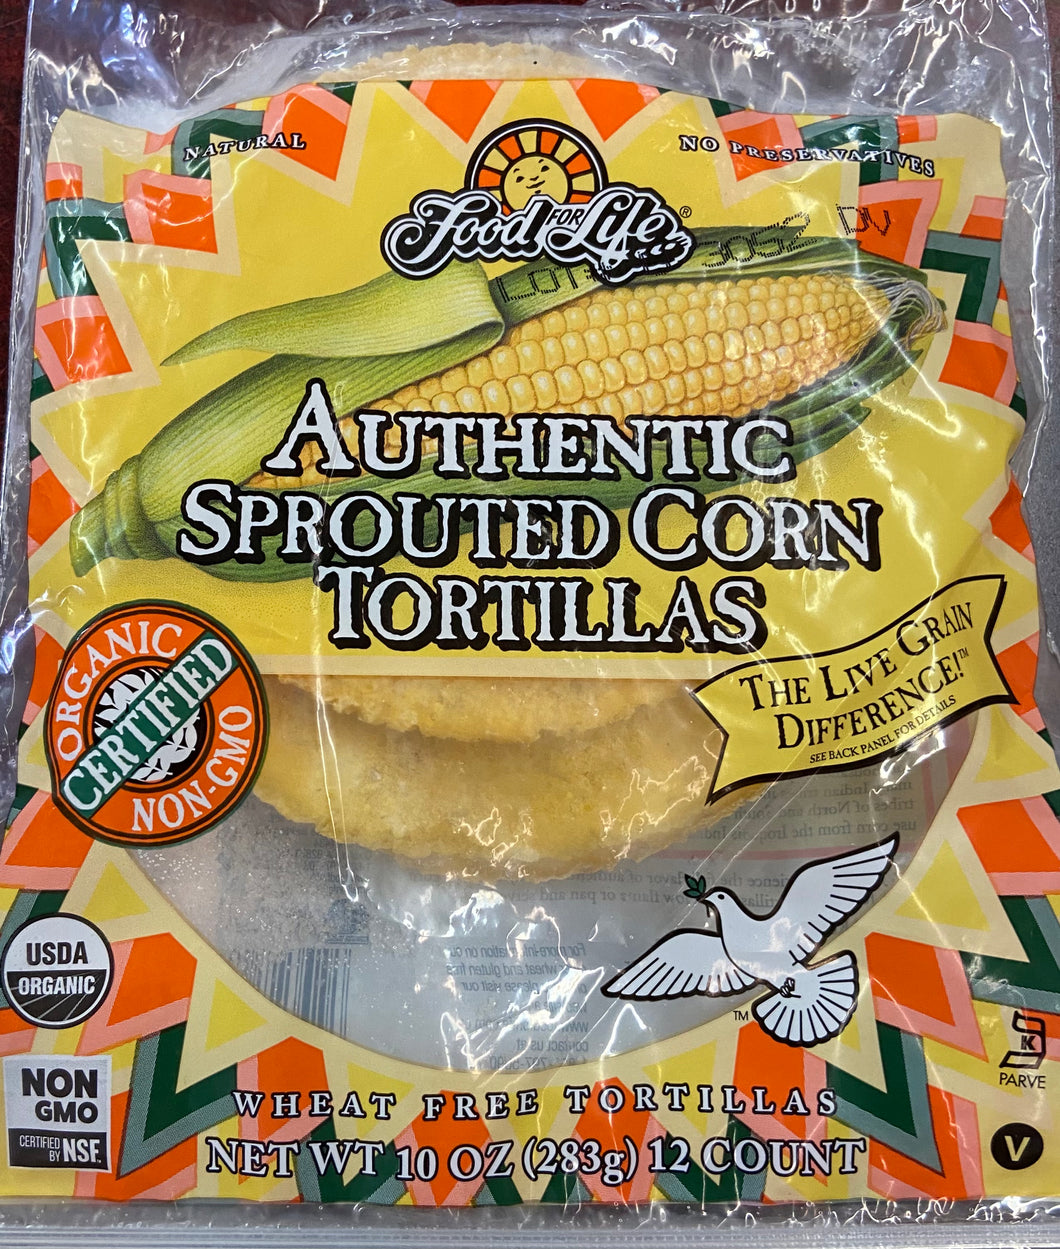 Tortillas, Sprouted Corn, Food for Life,  Organic